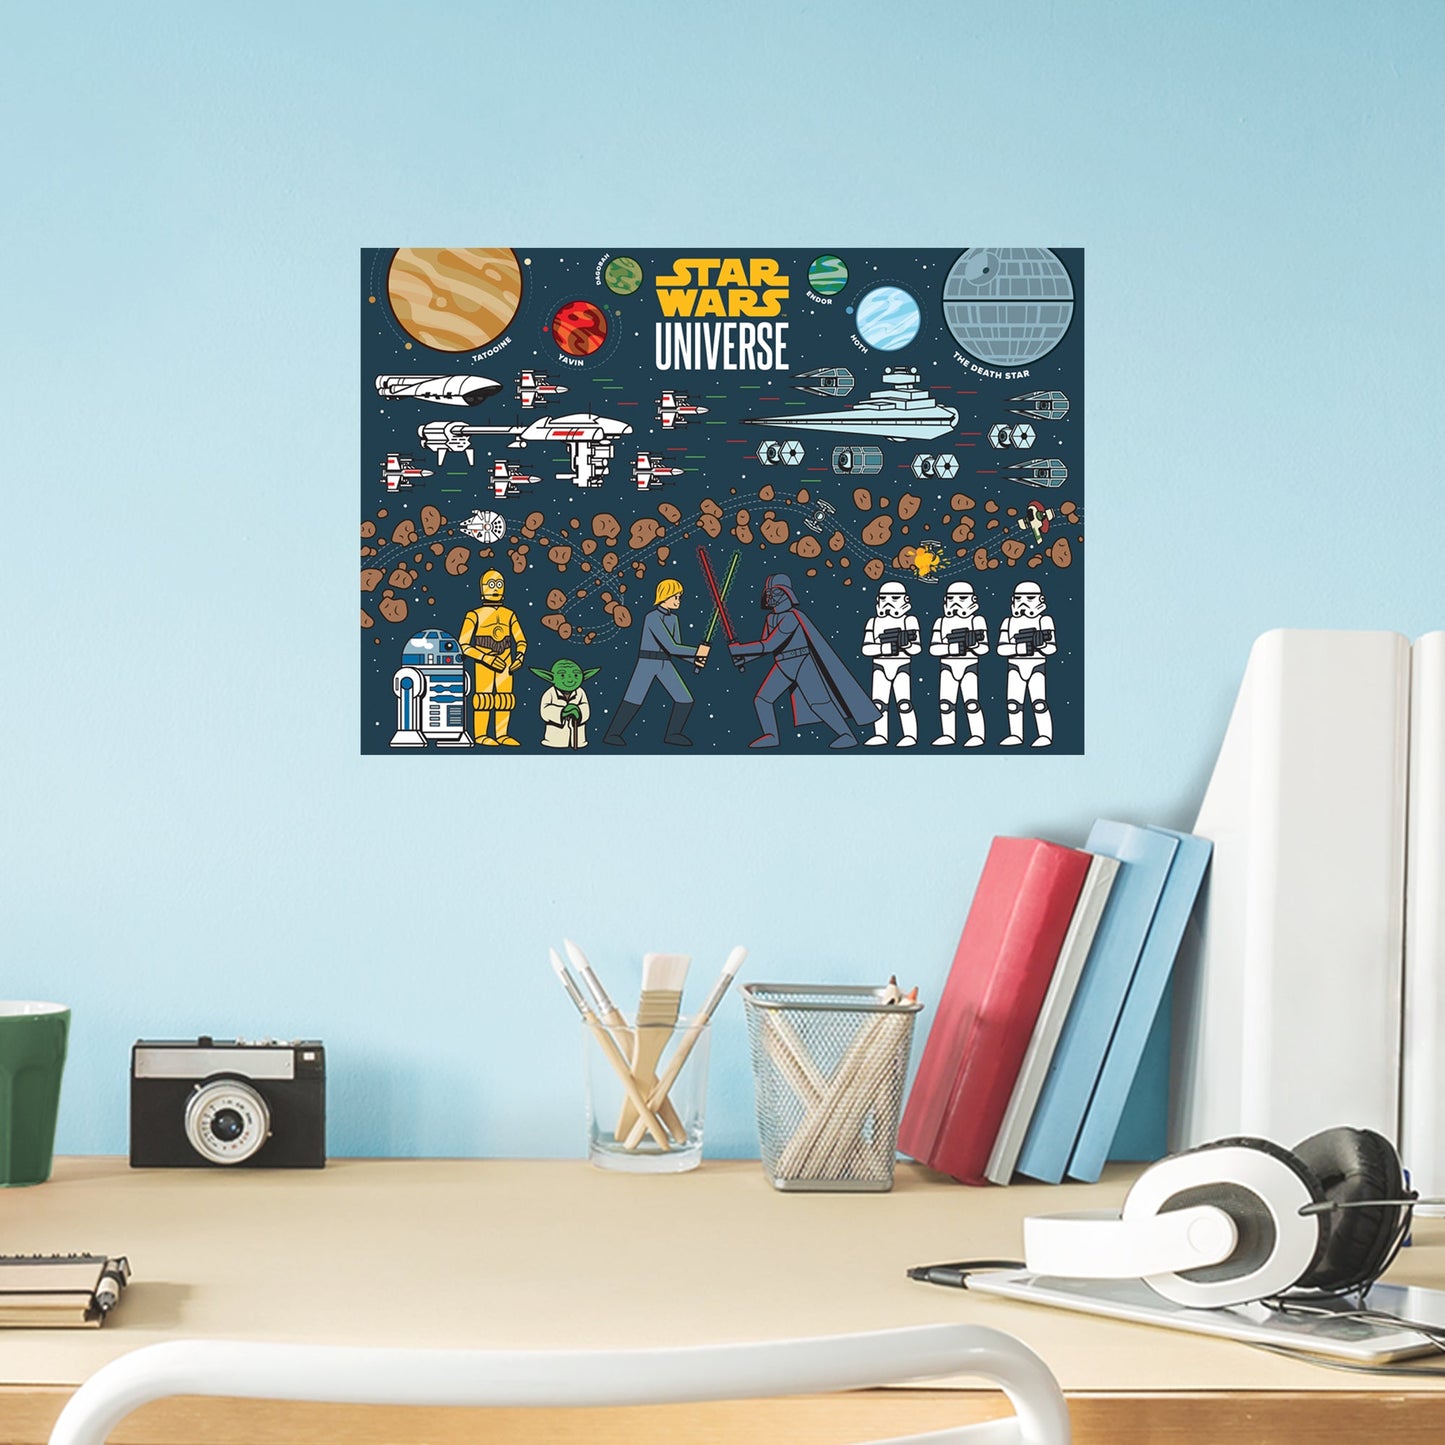 Star Wars Universe Poster - Officially Licensed Star Wars Removable Adhesive Decal